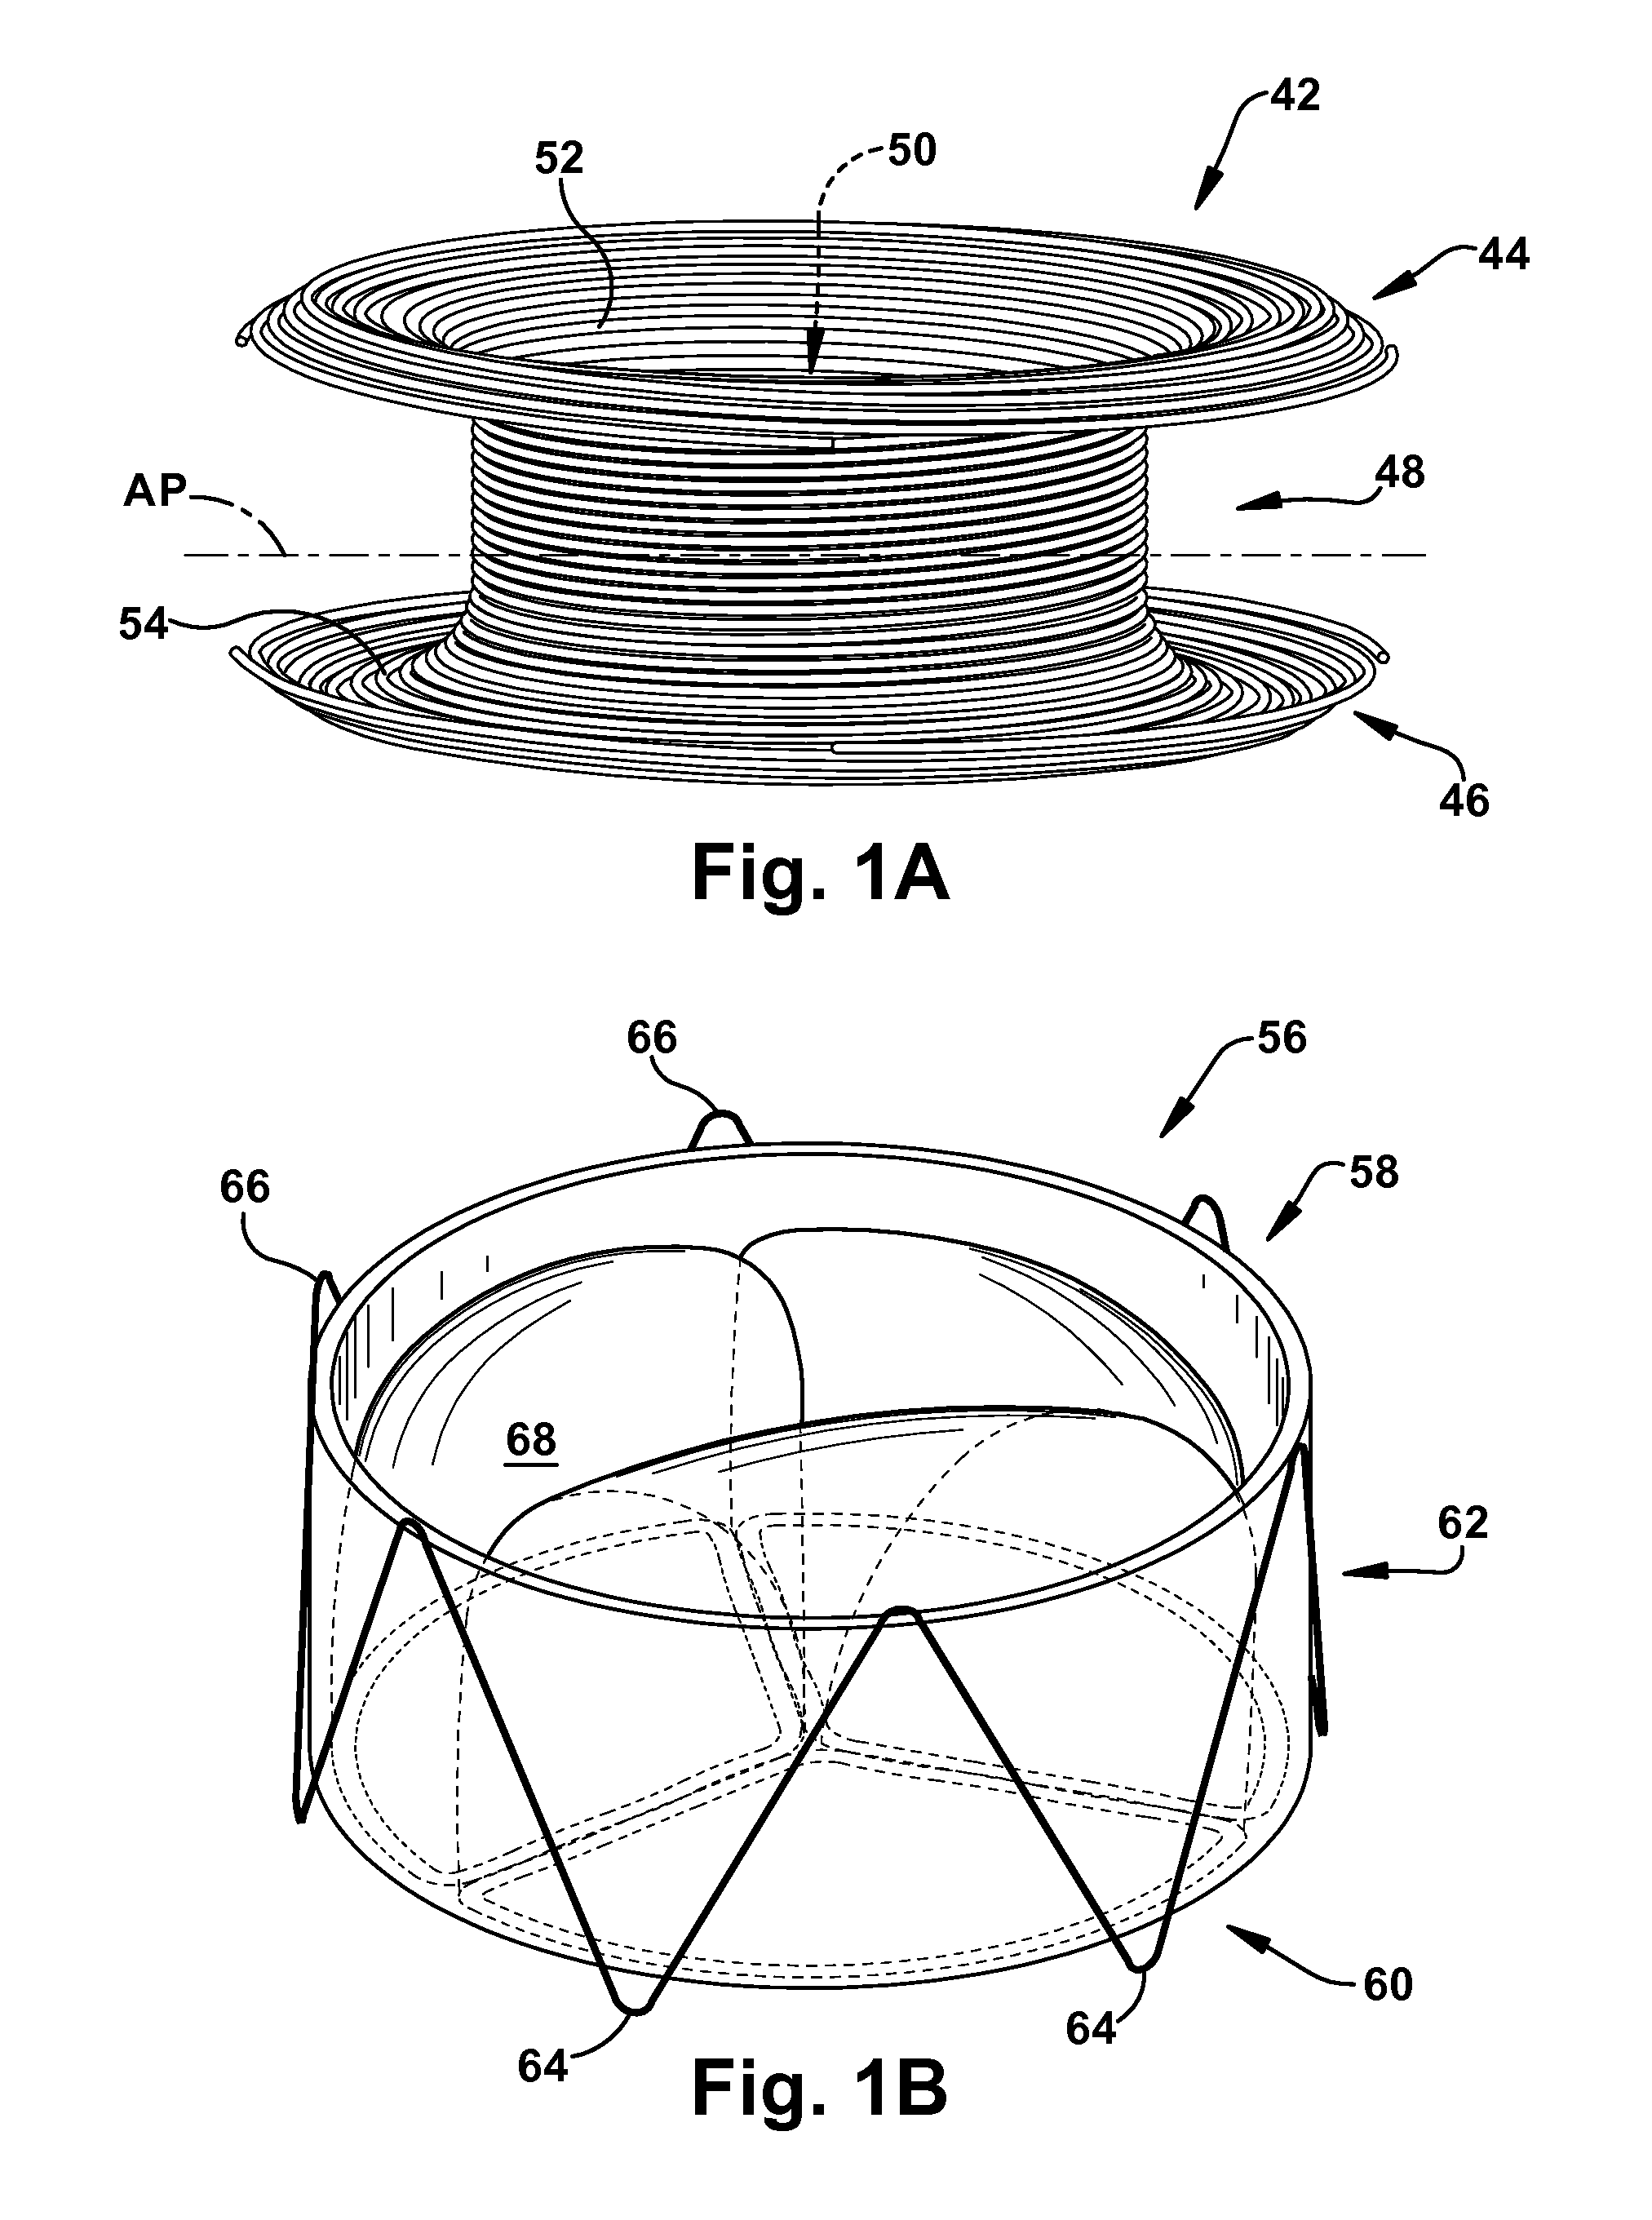 Apparatus and method for replacing a diseased cardiac valve